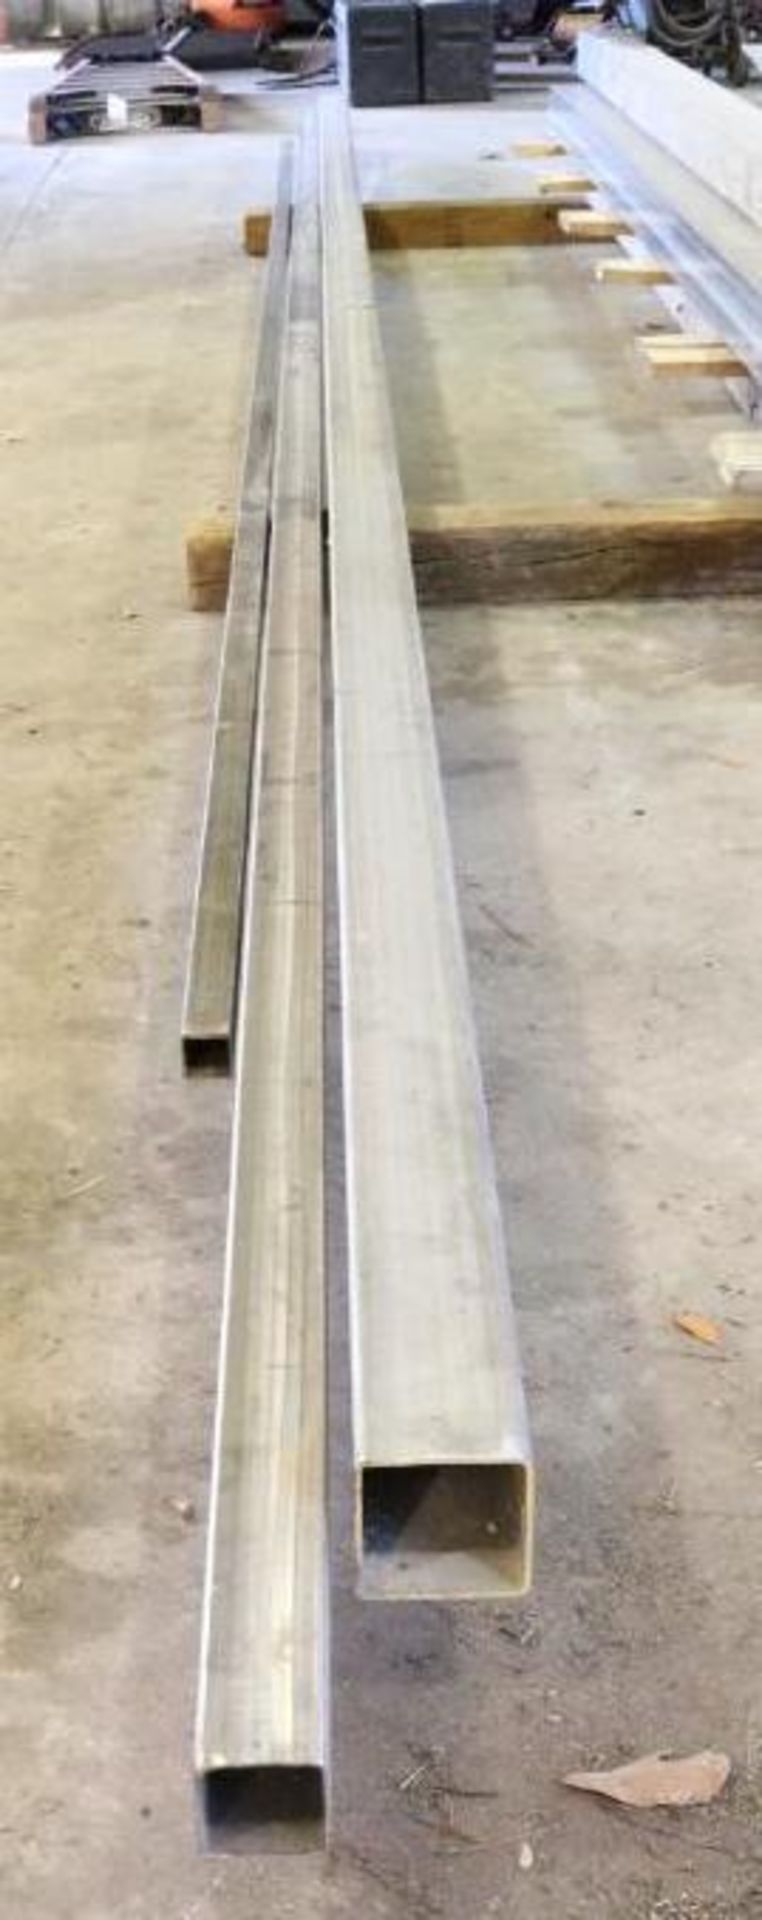 15 Ft. x 1 1/4" Sq Tube - Stainless